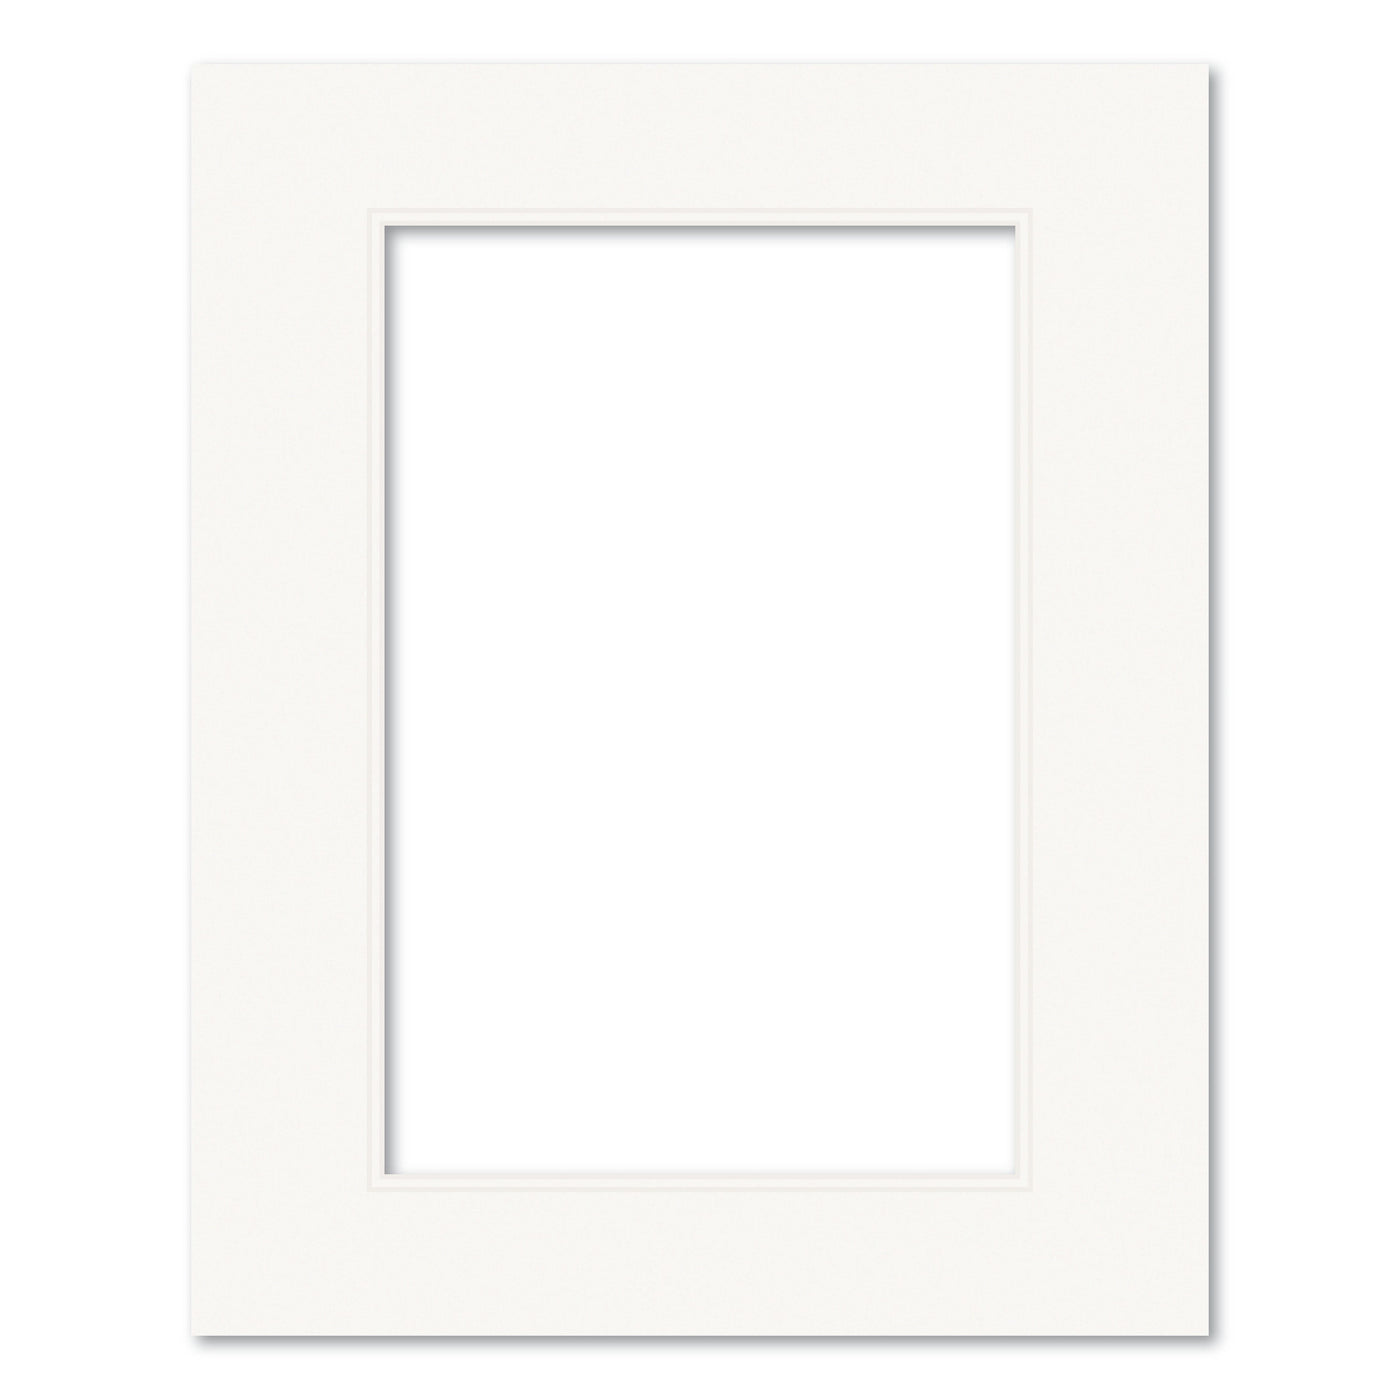 Ice White Double Acid-Free Mat Board 16x20in (40.6x50.8cm) to suit 10x15in (25x38cm) image from our Custom Cut Mat Boards collection by Profile Products (Australia) Pty Ltd